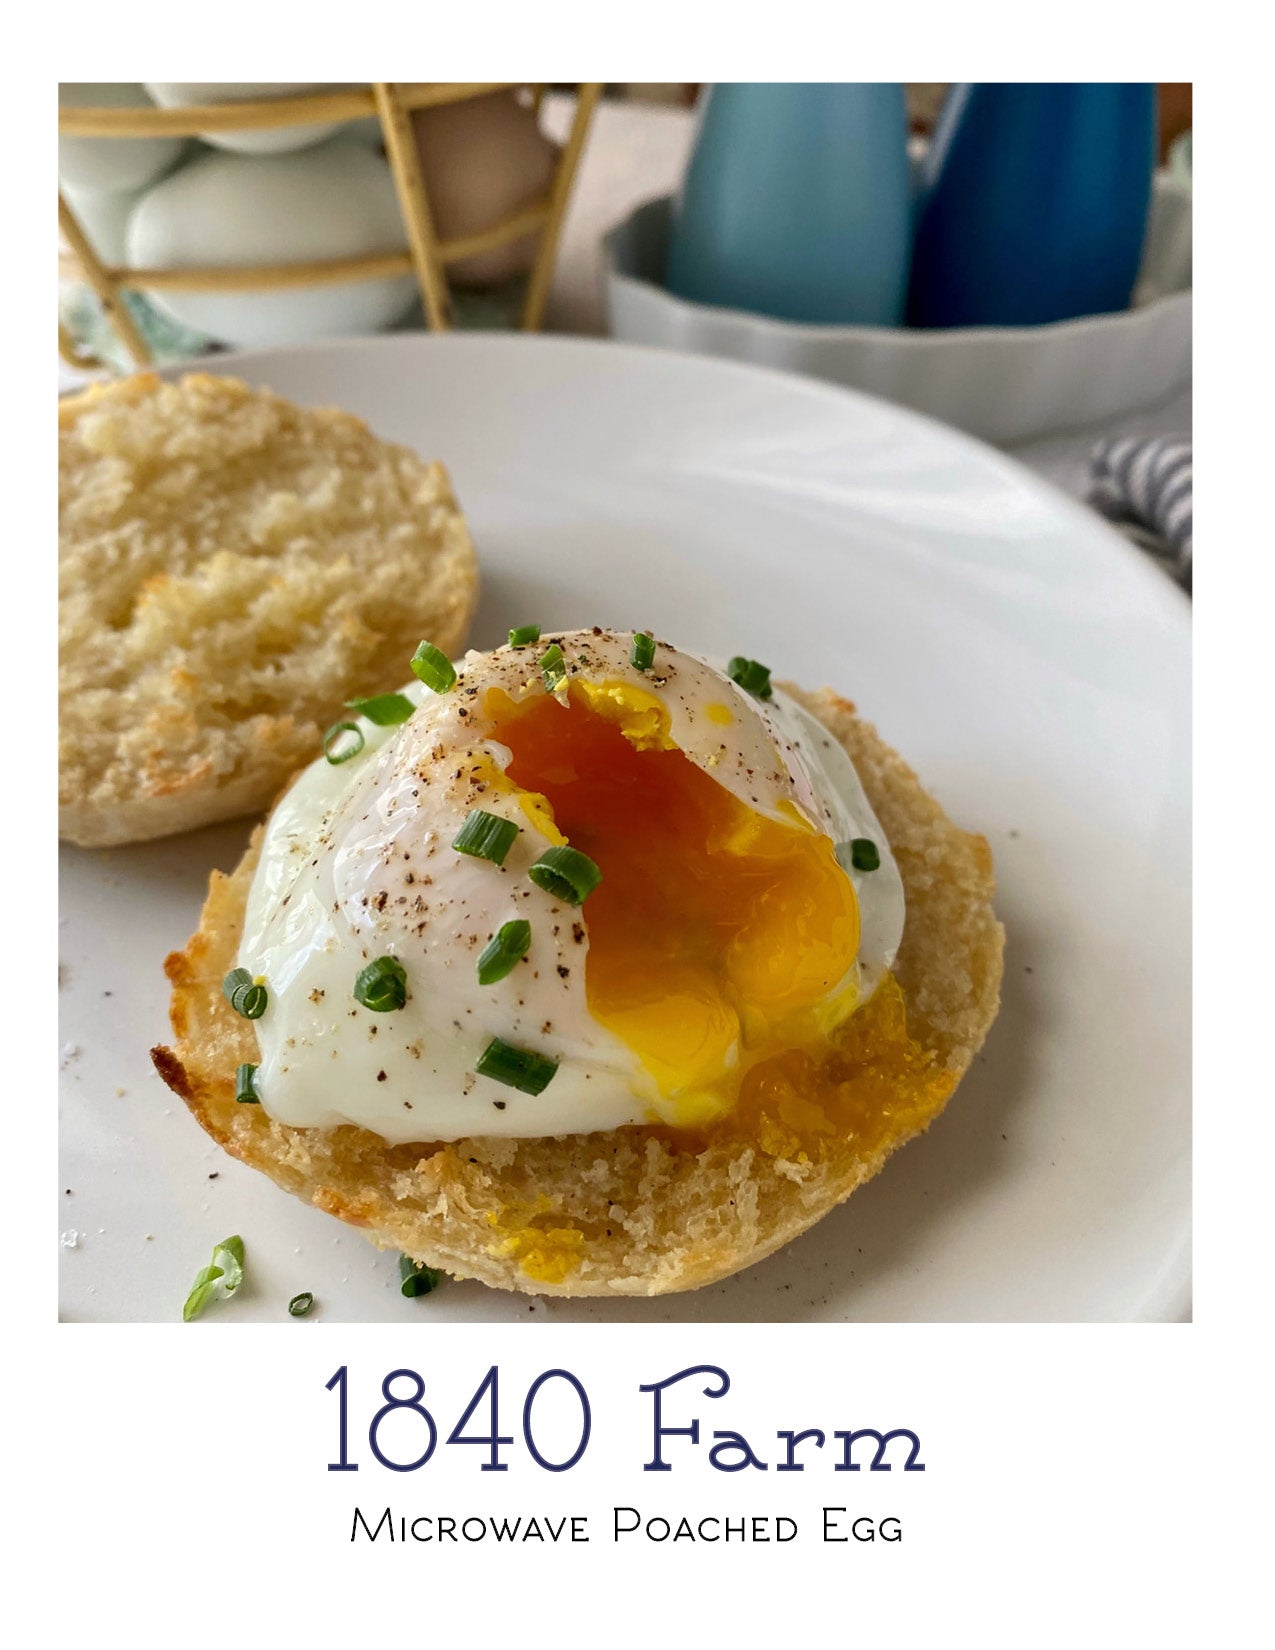 Holiday Special - Half Price Gift Subscription to 1840 Farm